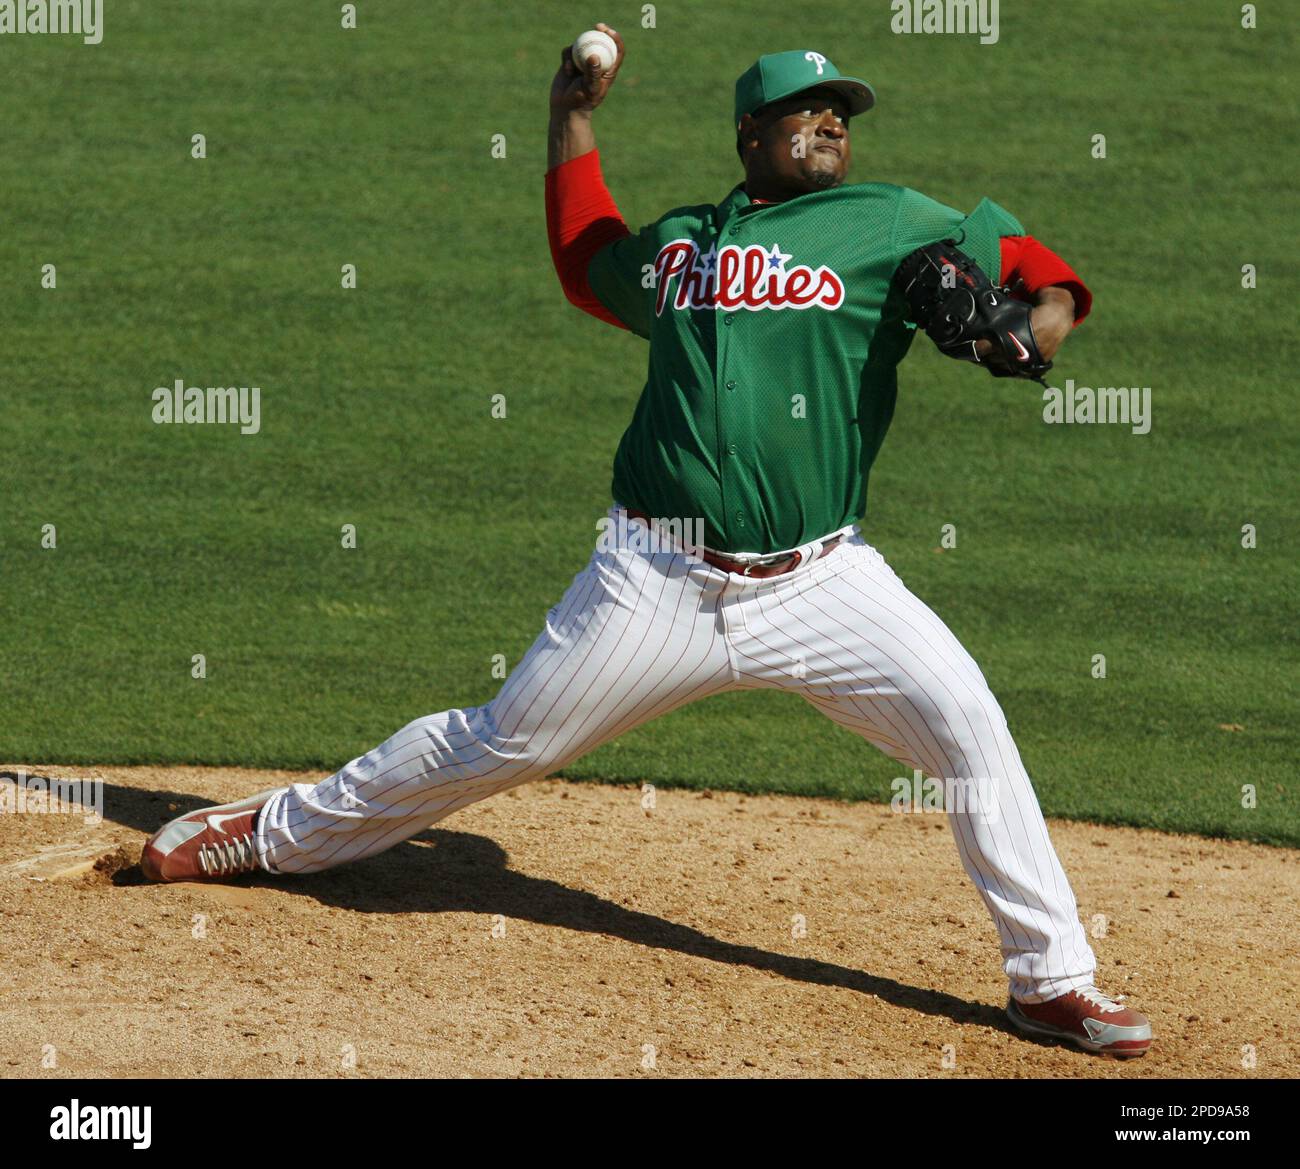 Philadelphia Phillies reliever Julio Santana winds up for a pitch in the  eighth inning of the